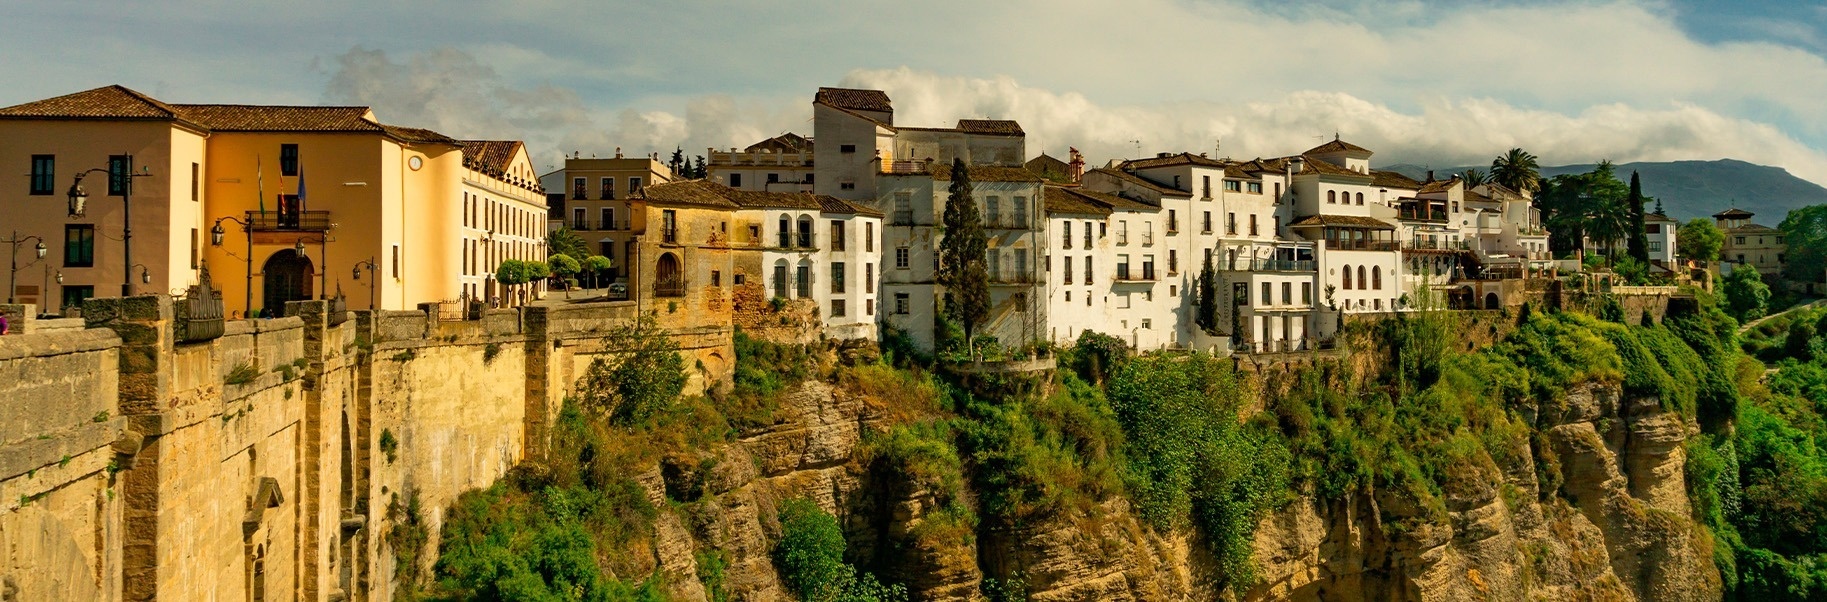 a row of buildings on the side of a cliff with a sign that says ' ayuntamiento ' on it